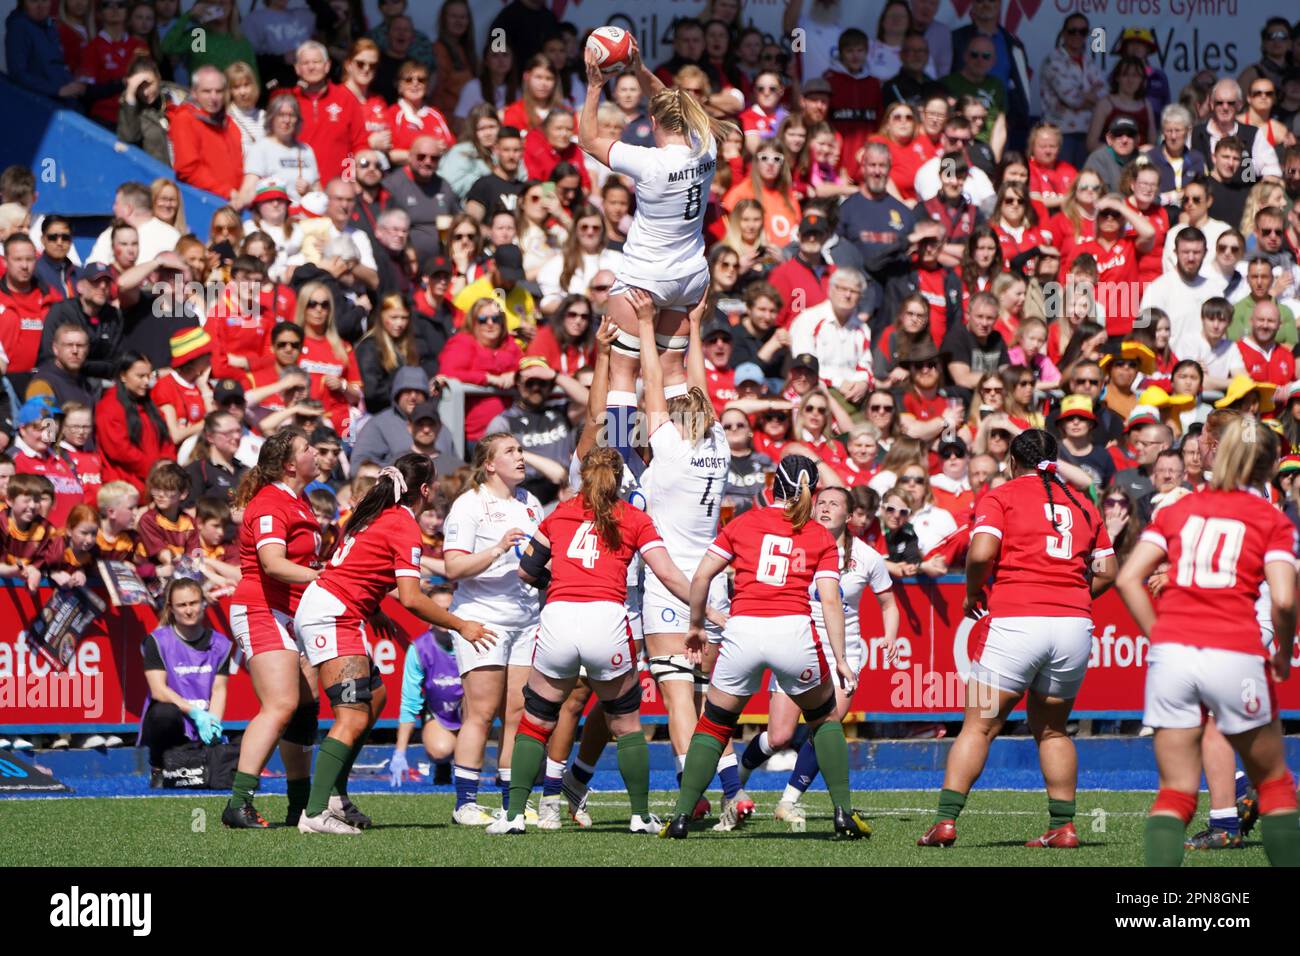 Alex Matthews collects at the line out in front of a record crowd at Cardiff Arms Park. Wales 3 v 59 England. Stock Photo